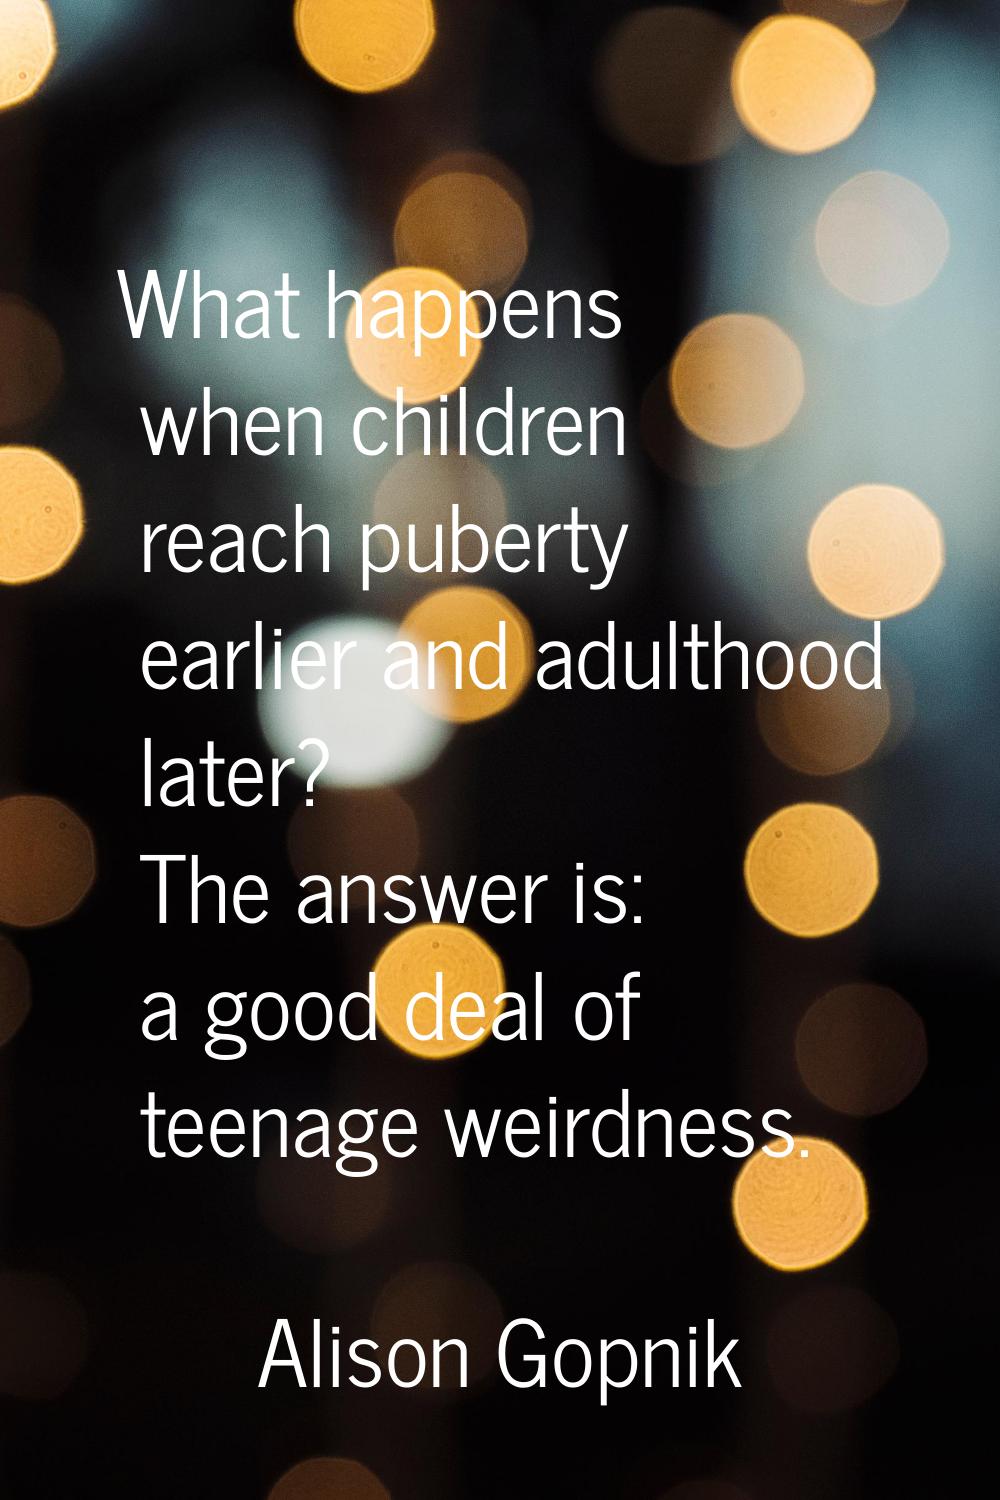 What happens when children reach puberty earlier and adulthood later? The answer is: a good deal of